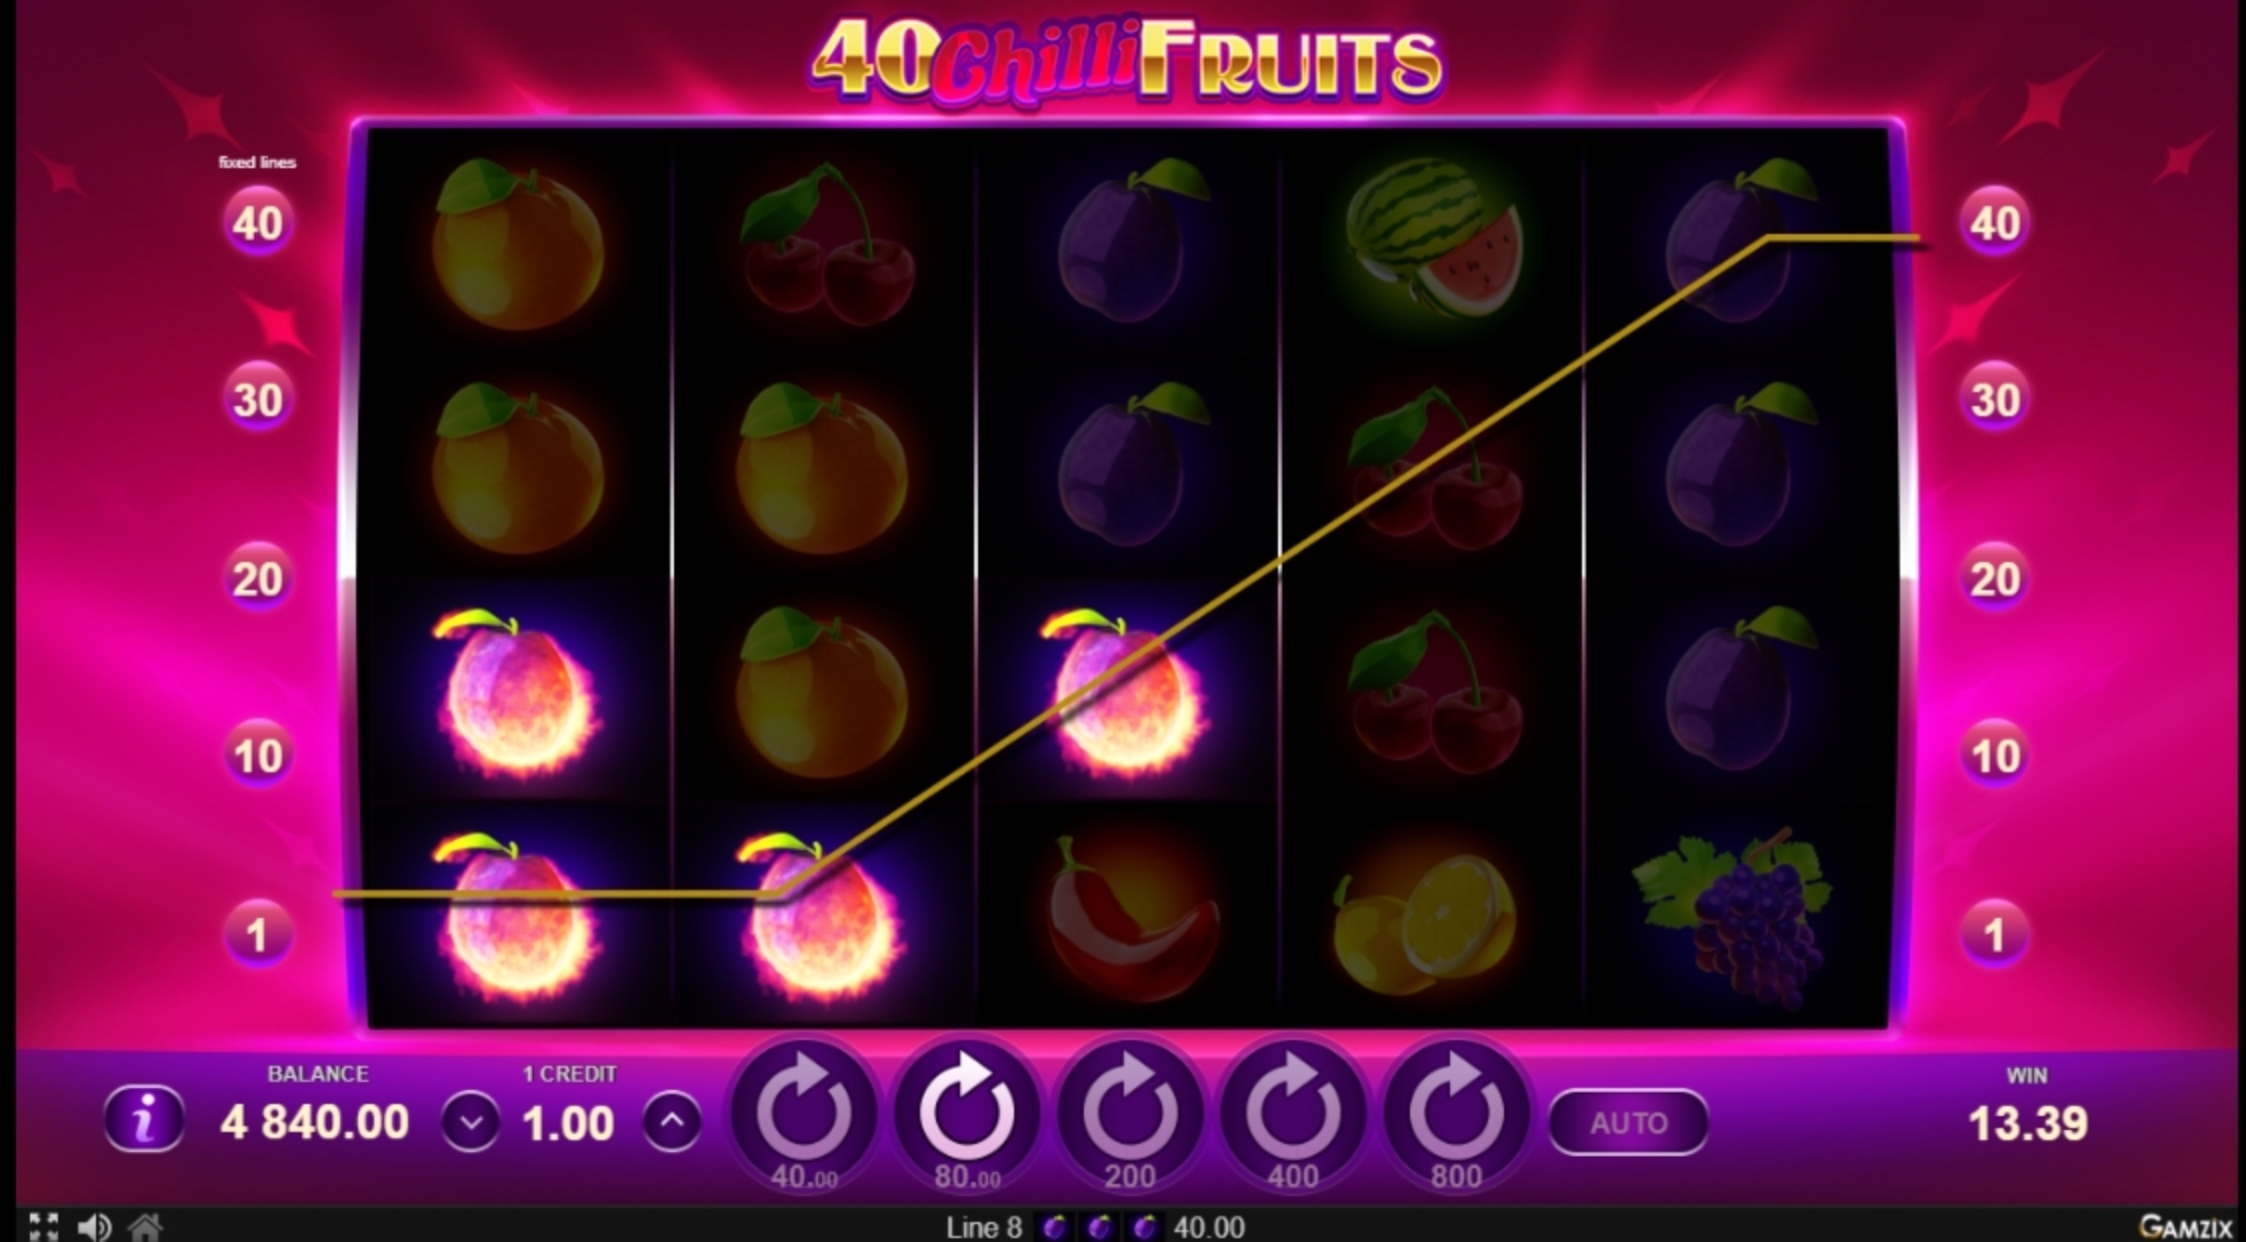 Win Money in 40 Chilli Fruits Free Slot Game by Gamzix